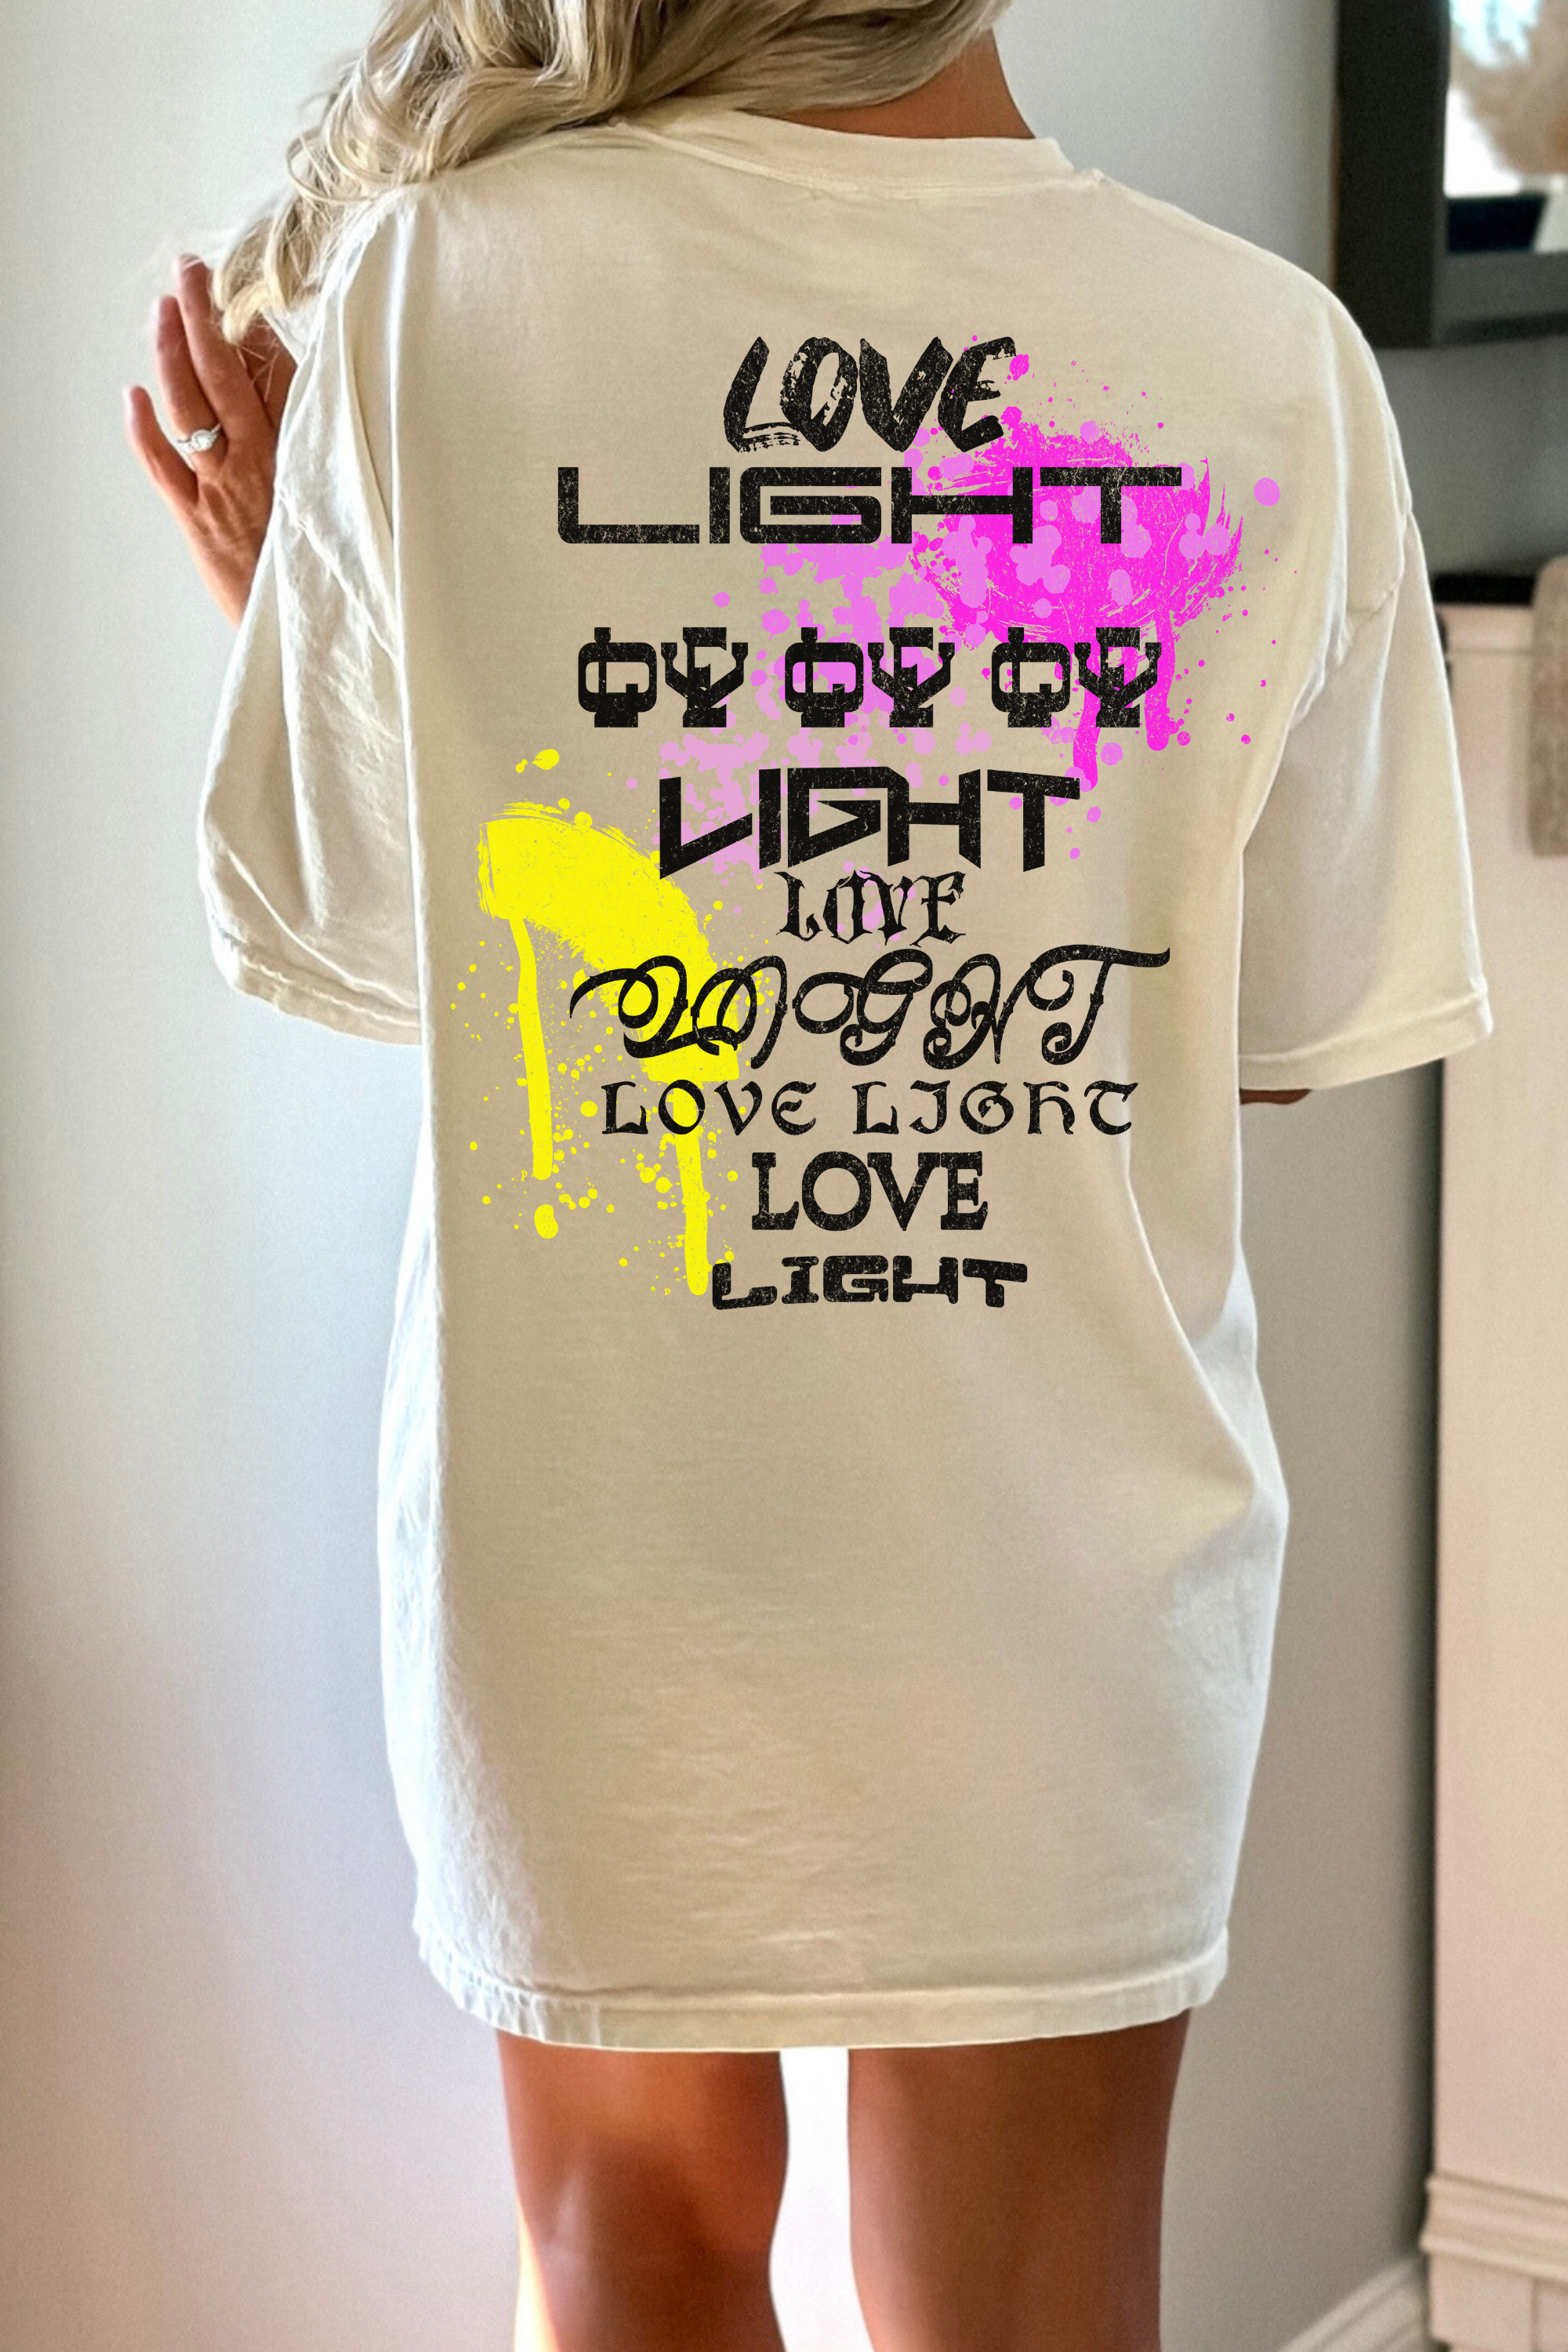 GOLDxTEAL stylish and colorful Love and Light graphic t-shirt.